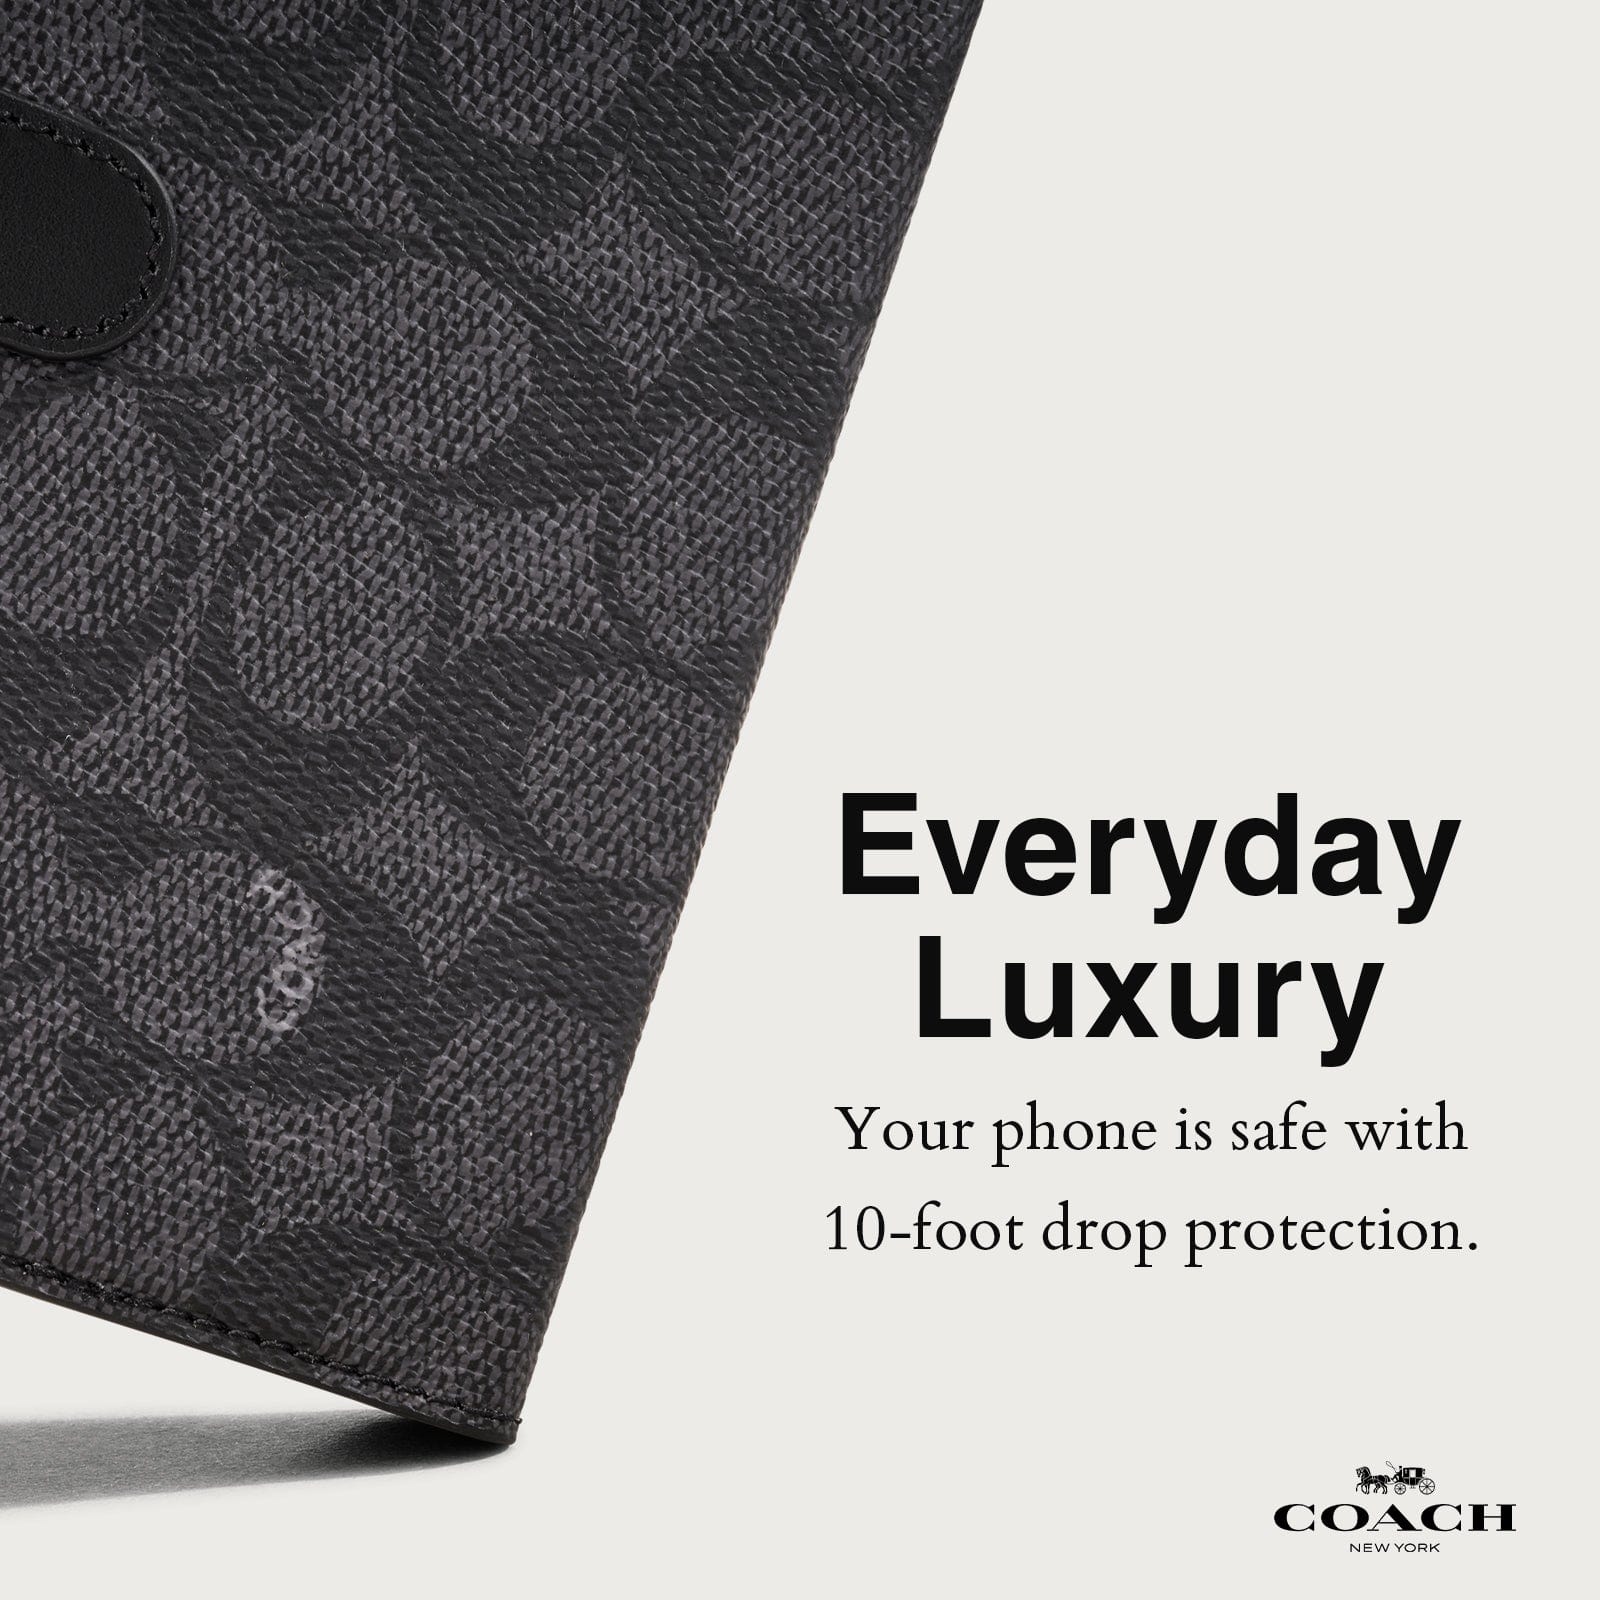 EVERYDAY LUXURY. YOUR PHONE IS SAFE WITH 10-FOOT DROP PROTECTION. 